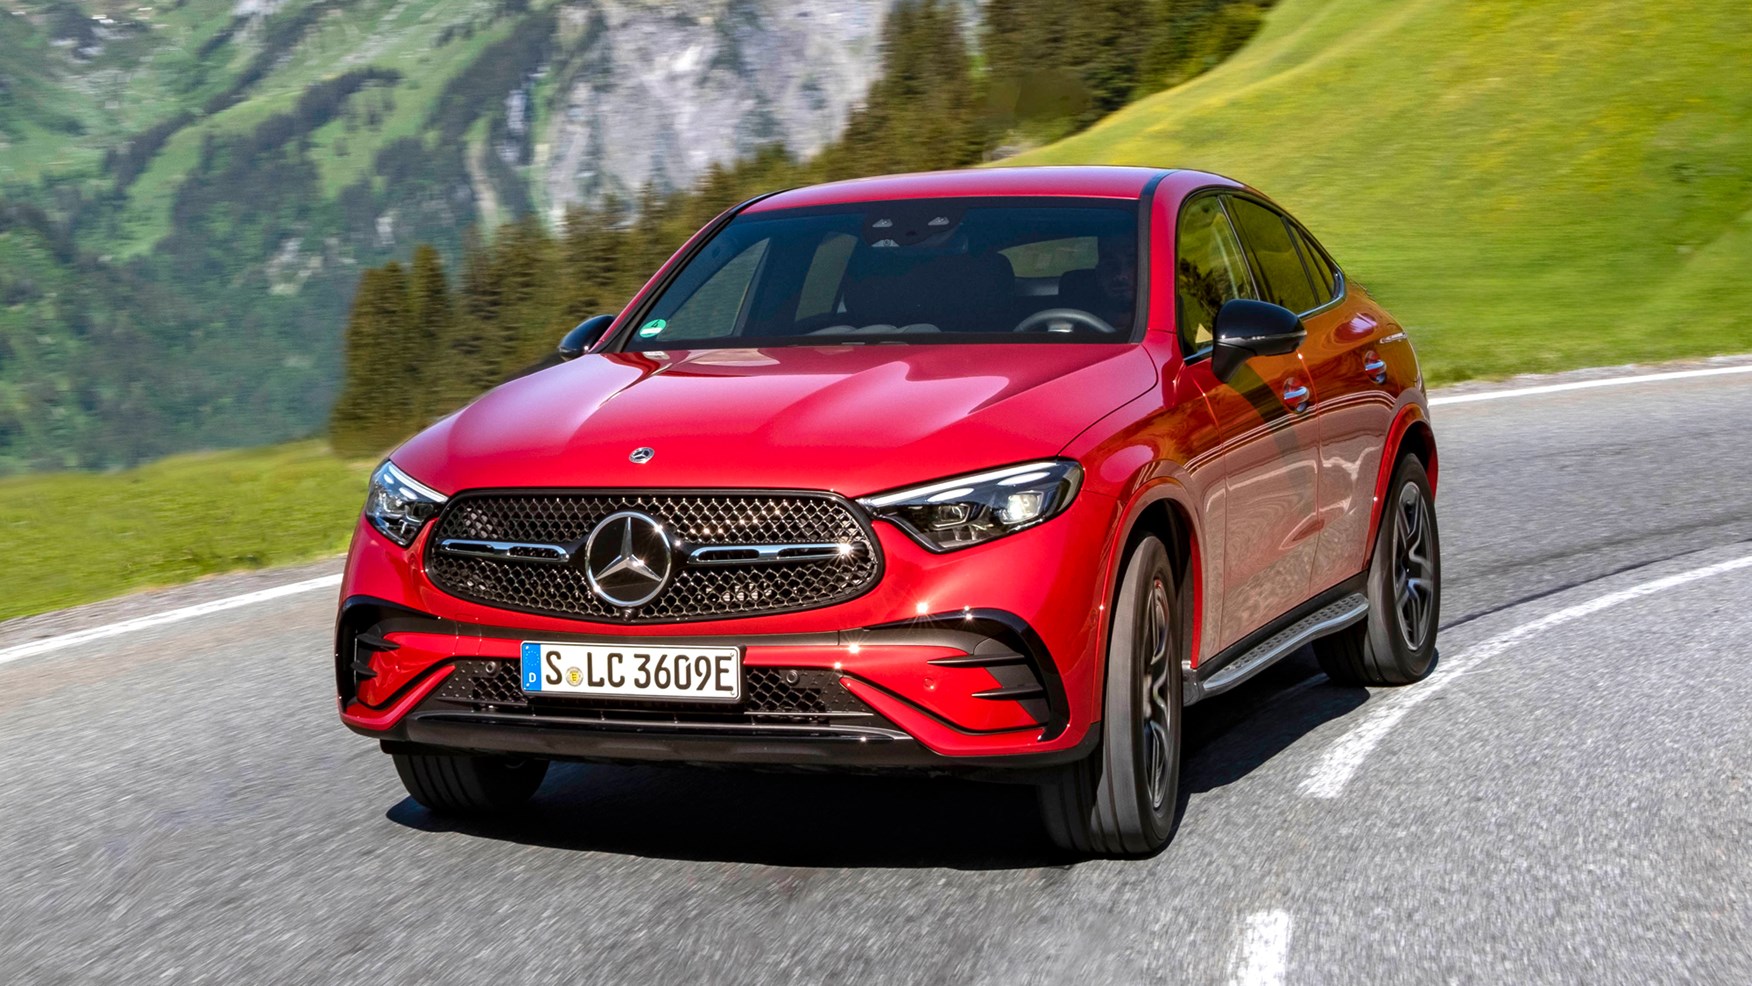 https://car-images.bauersecure.com/wp-images/166209/1752x1168/070-mercedes-glc-coupe.jpg?mode=max&quality=90&scale=down